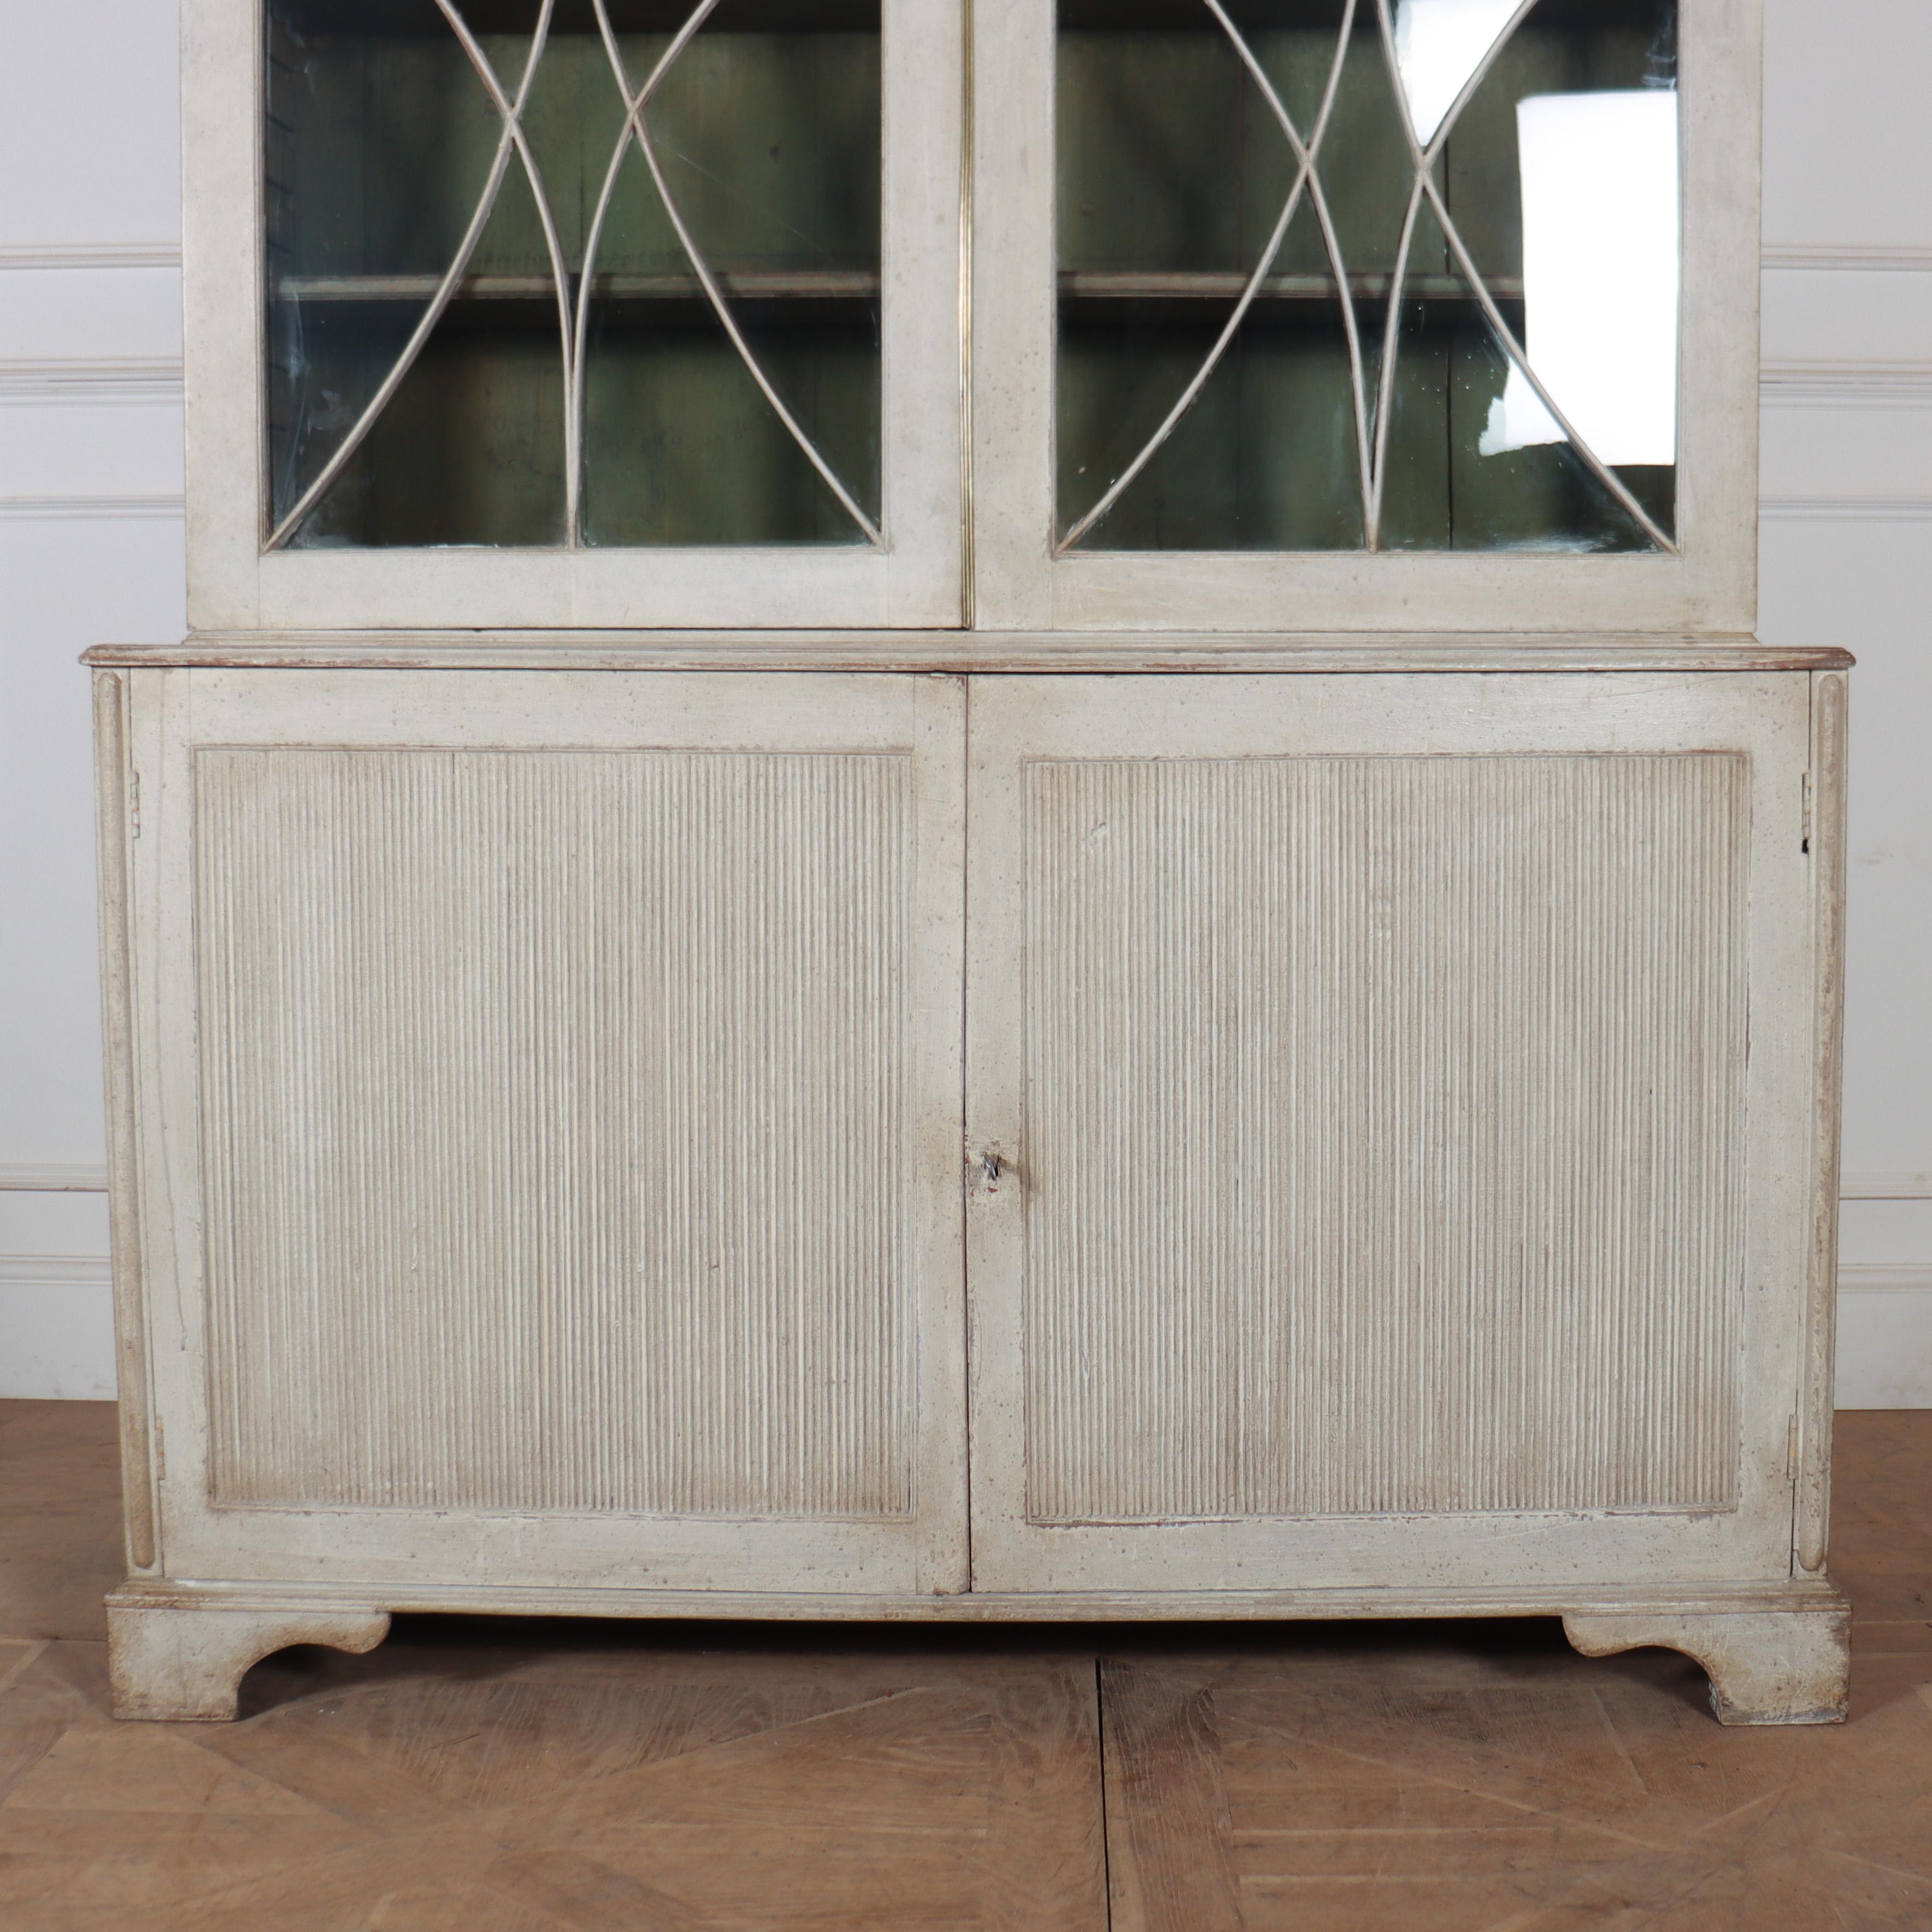 Early 19th C Swedish glazed bookcase / vitrine. 1830.

Reference: 8113

Dimensions
58 inches (147 cms) Wide
23.5 inches (60 cms) Deep
94.5 inches (240 cms) High